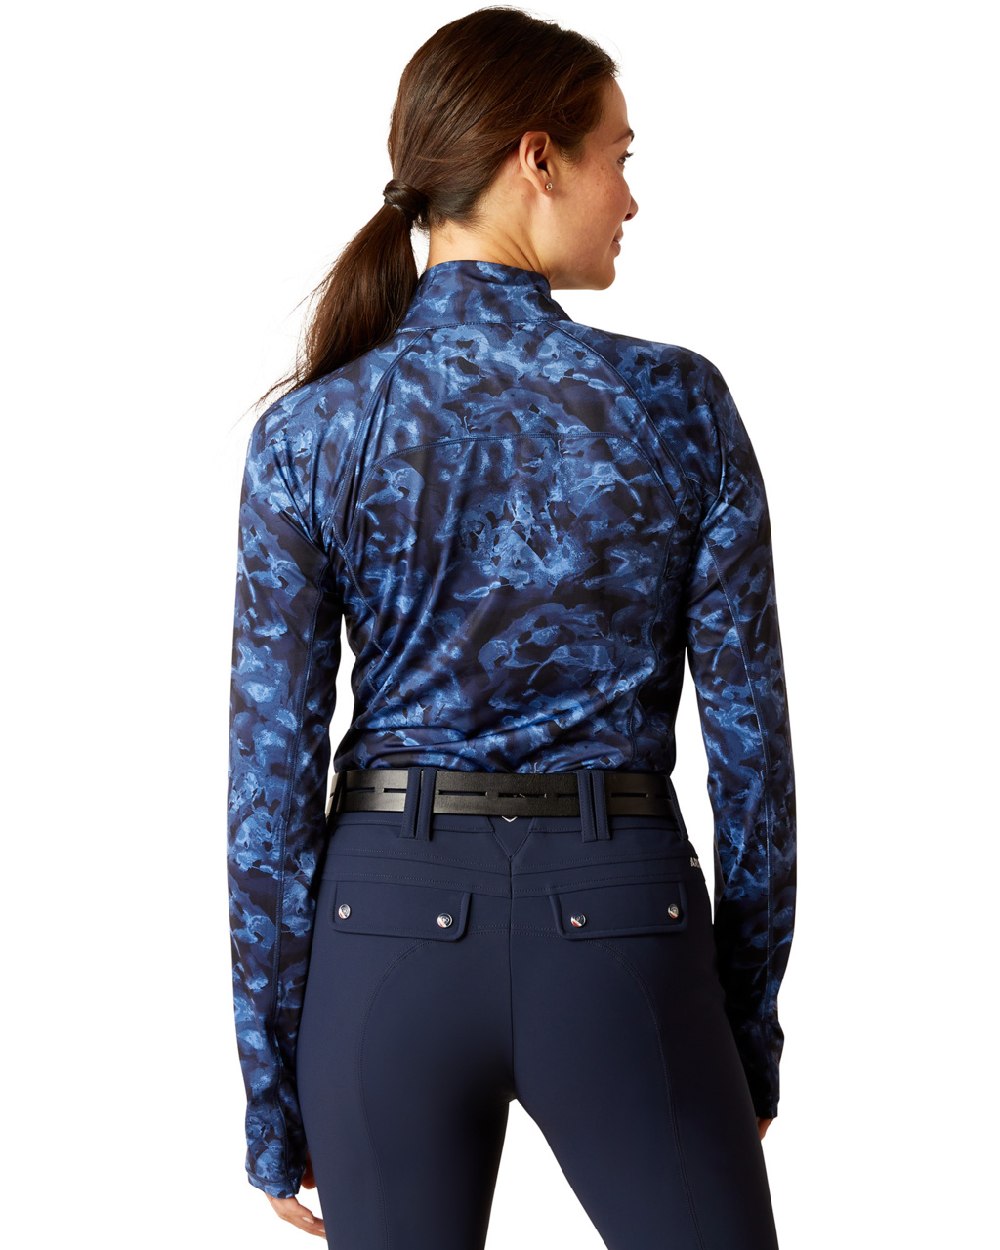 Ariat Womens Lowell 2.0 1/4 Zip Long Sleeve Base Layer in Stormy Skies 